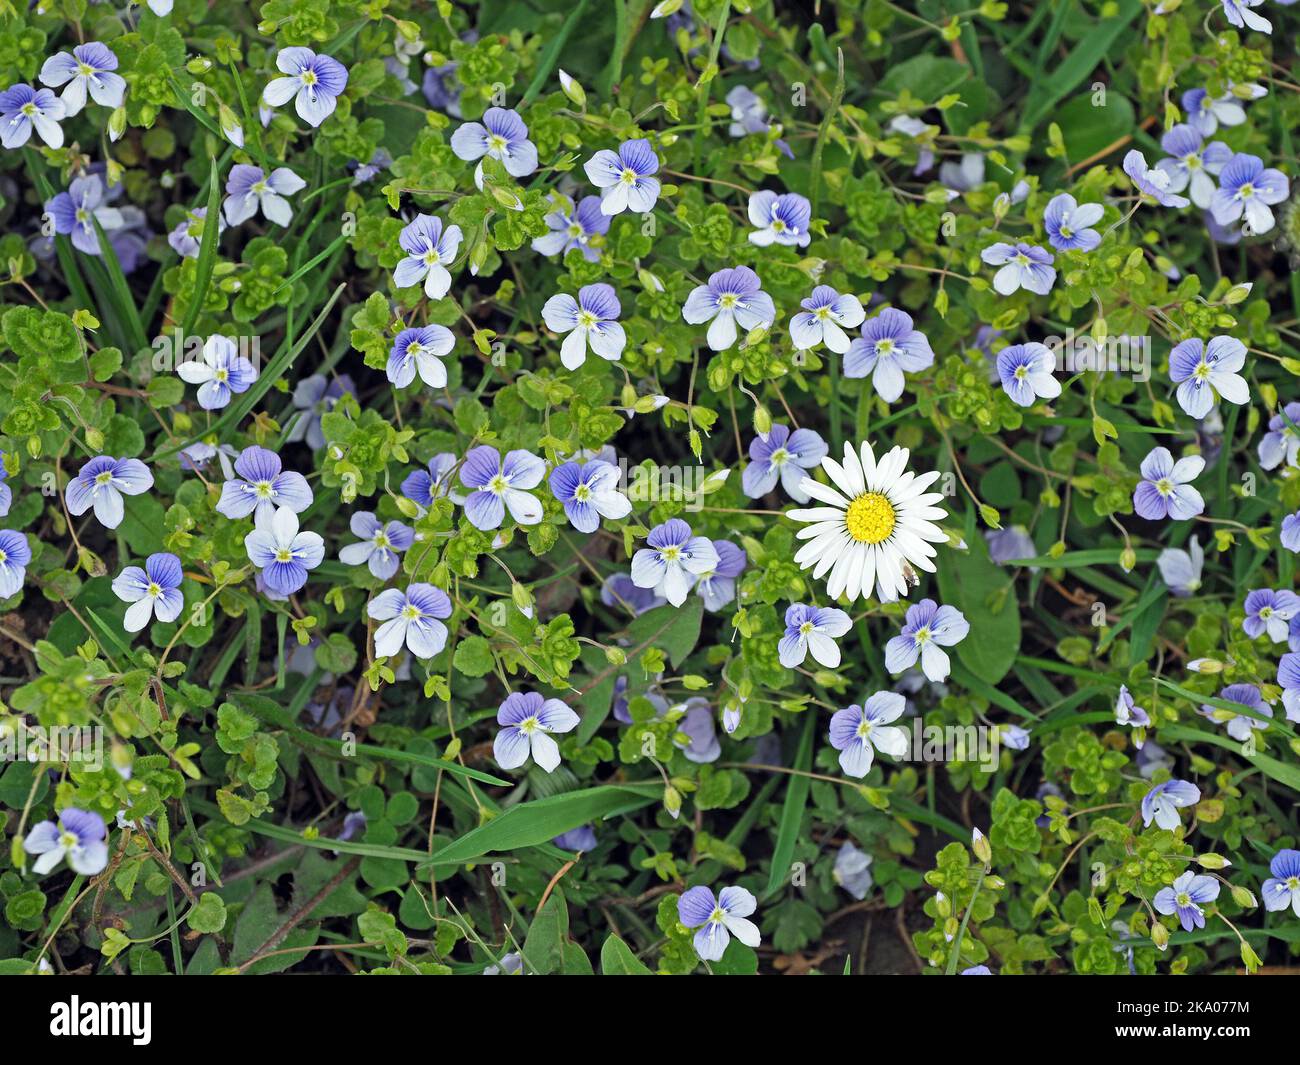 yellowy orange ‘disc florets’ of Common Daisy (Bellis perennis) surrounded by white ‘ray florets' amid sea of blue flowers of Speedwell (Veronica sp) Stock Photo